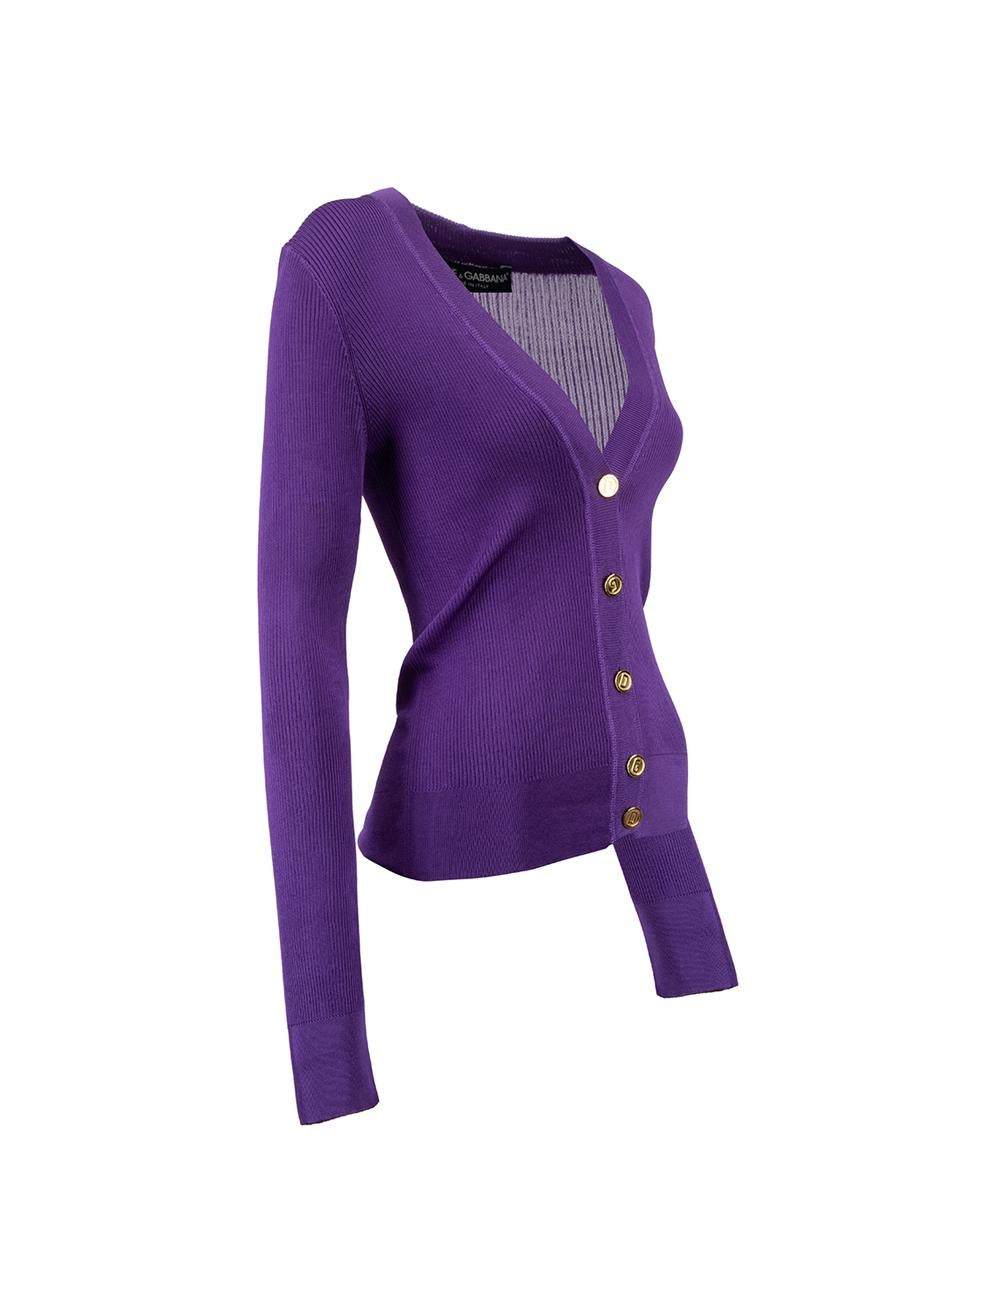 CONDITION is Very good. Hardly any visible wear to cardigan is evident on this used Dolce & Gabbana designer resale item. 
 
 Details
  Purple
 Synthetic
 Long sleeves cardigan
 Front button up closure
 D initial buttons
 
 
 Made in Italy
 
